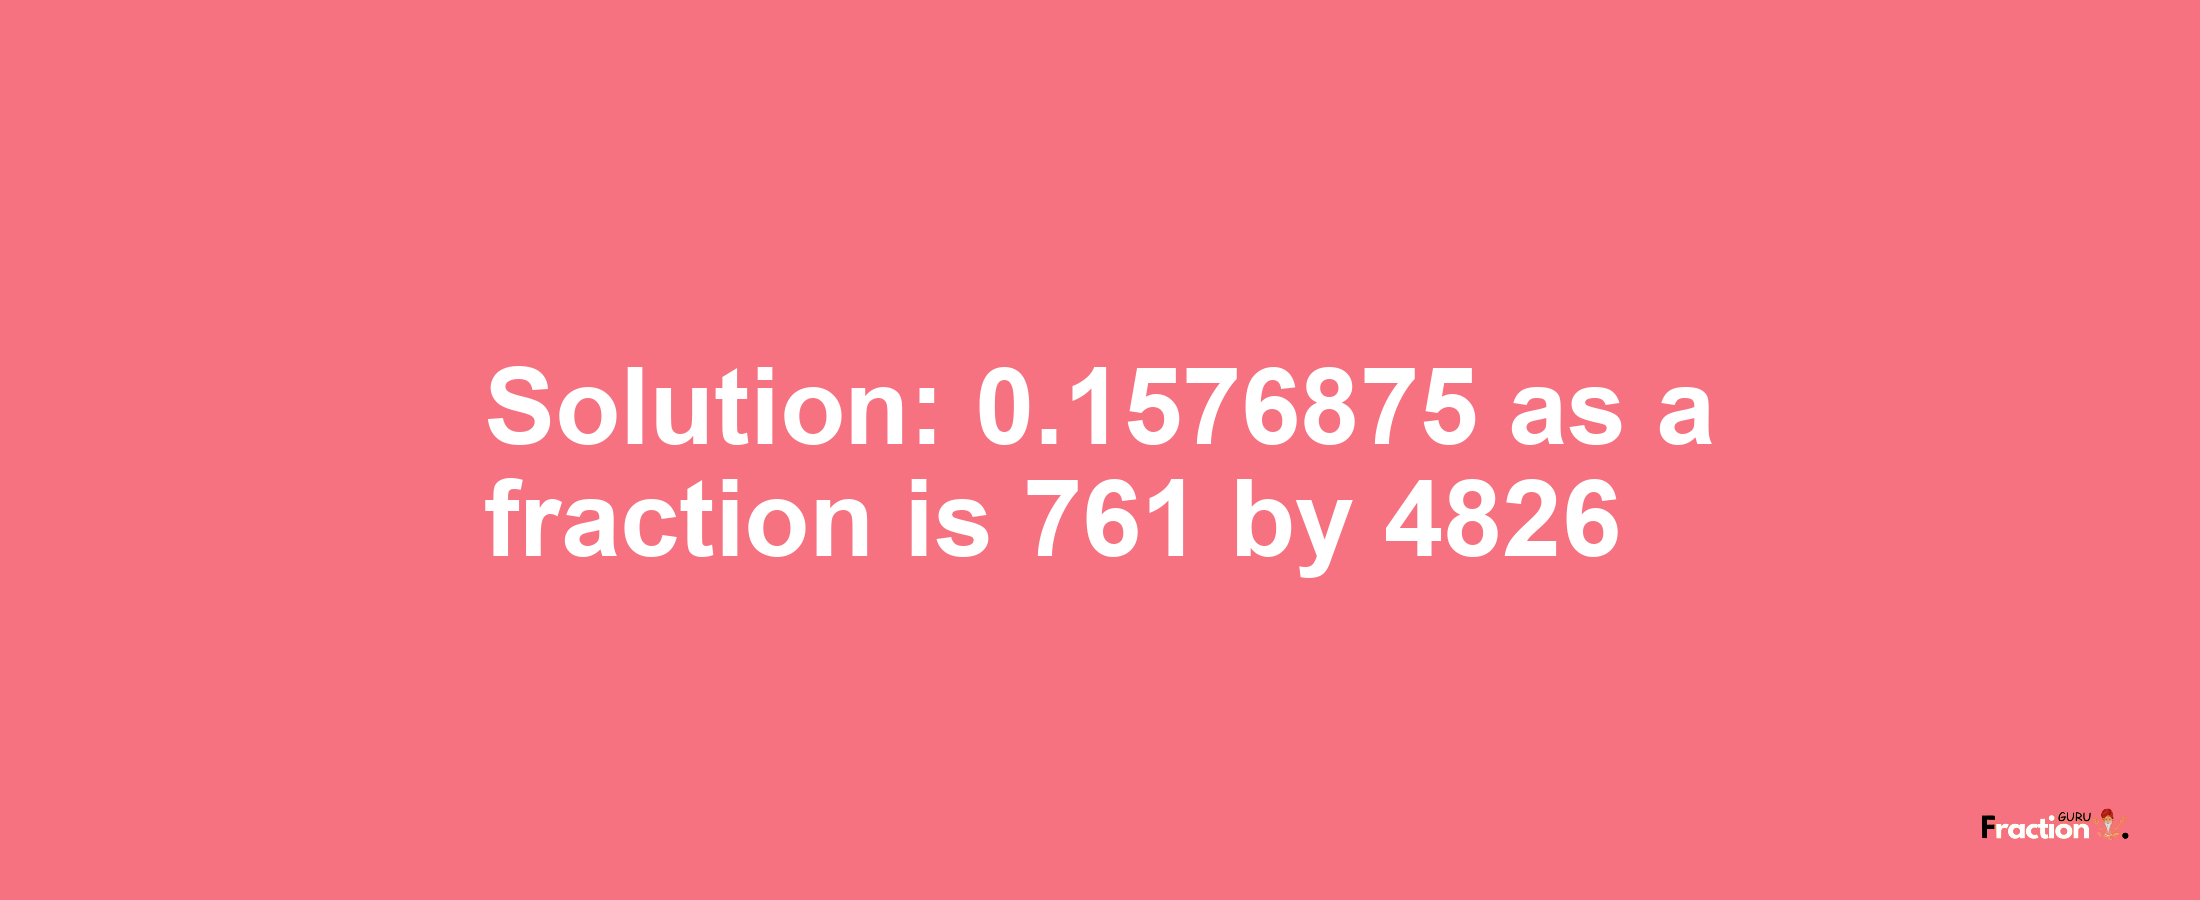 Solution:0.1576875 as a fraction is 761/4826